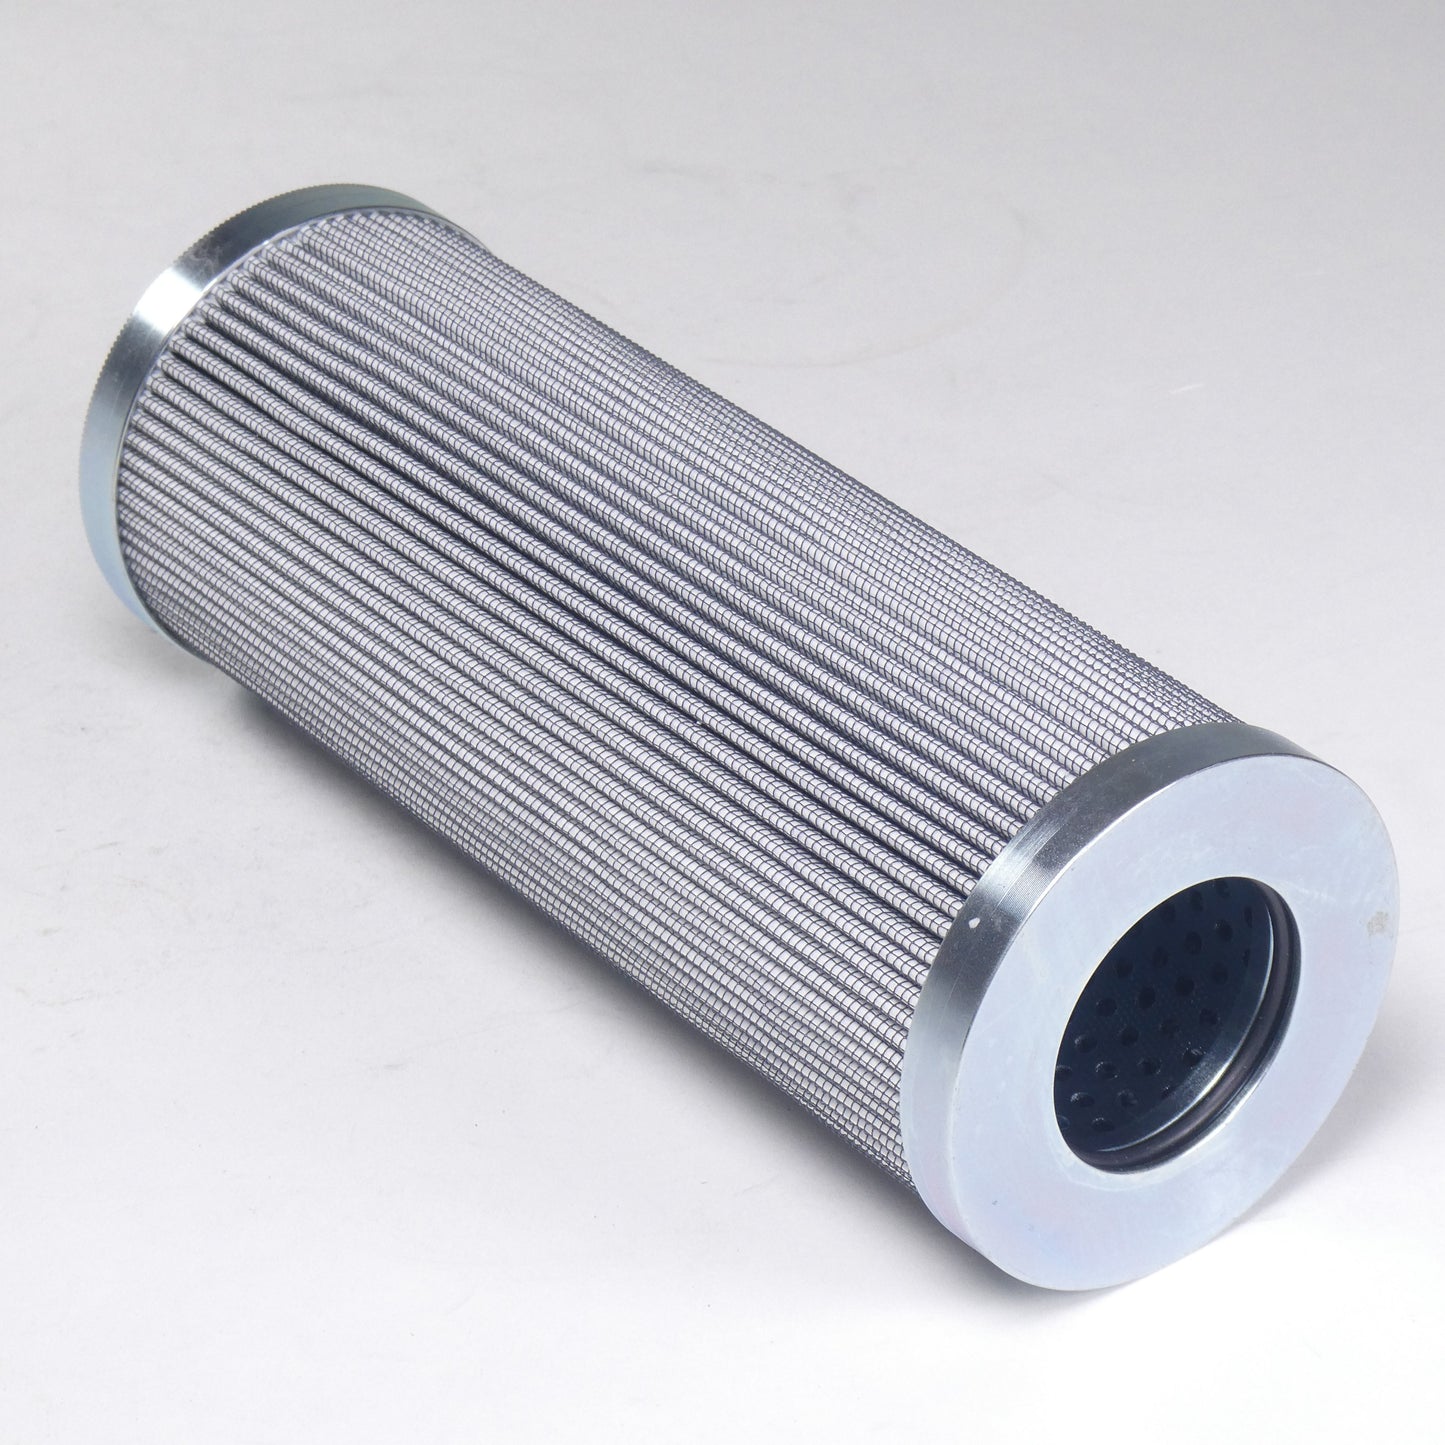 Hydrafil Replacement Filter Element for Pall HC9601FCP4JY806